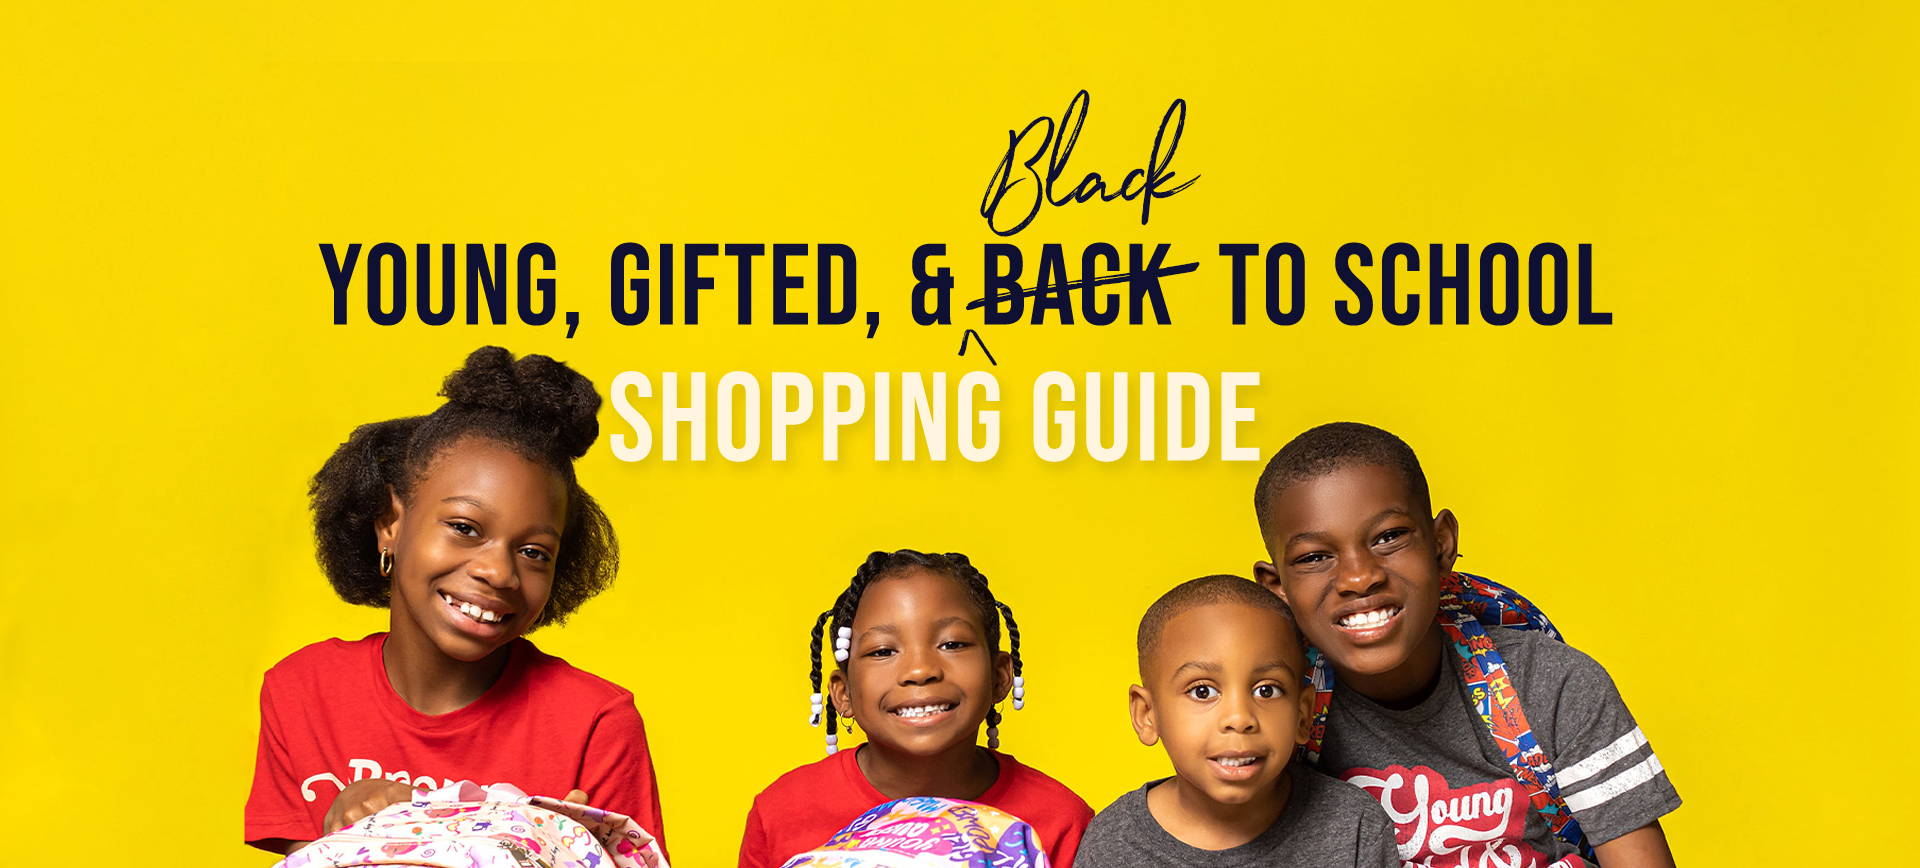 Young Gifted & Black To School Shopping Guide